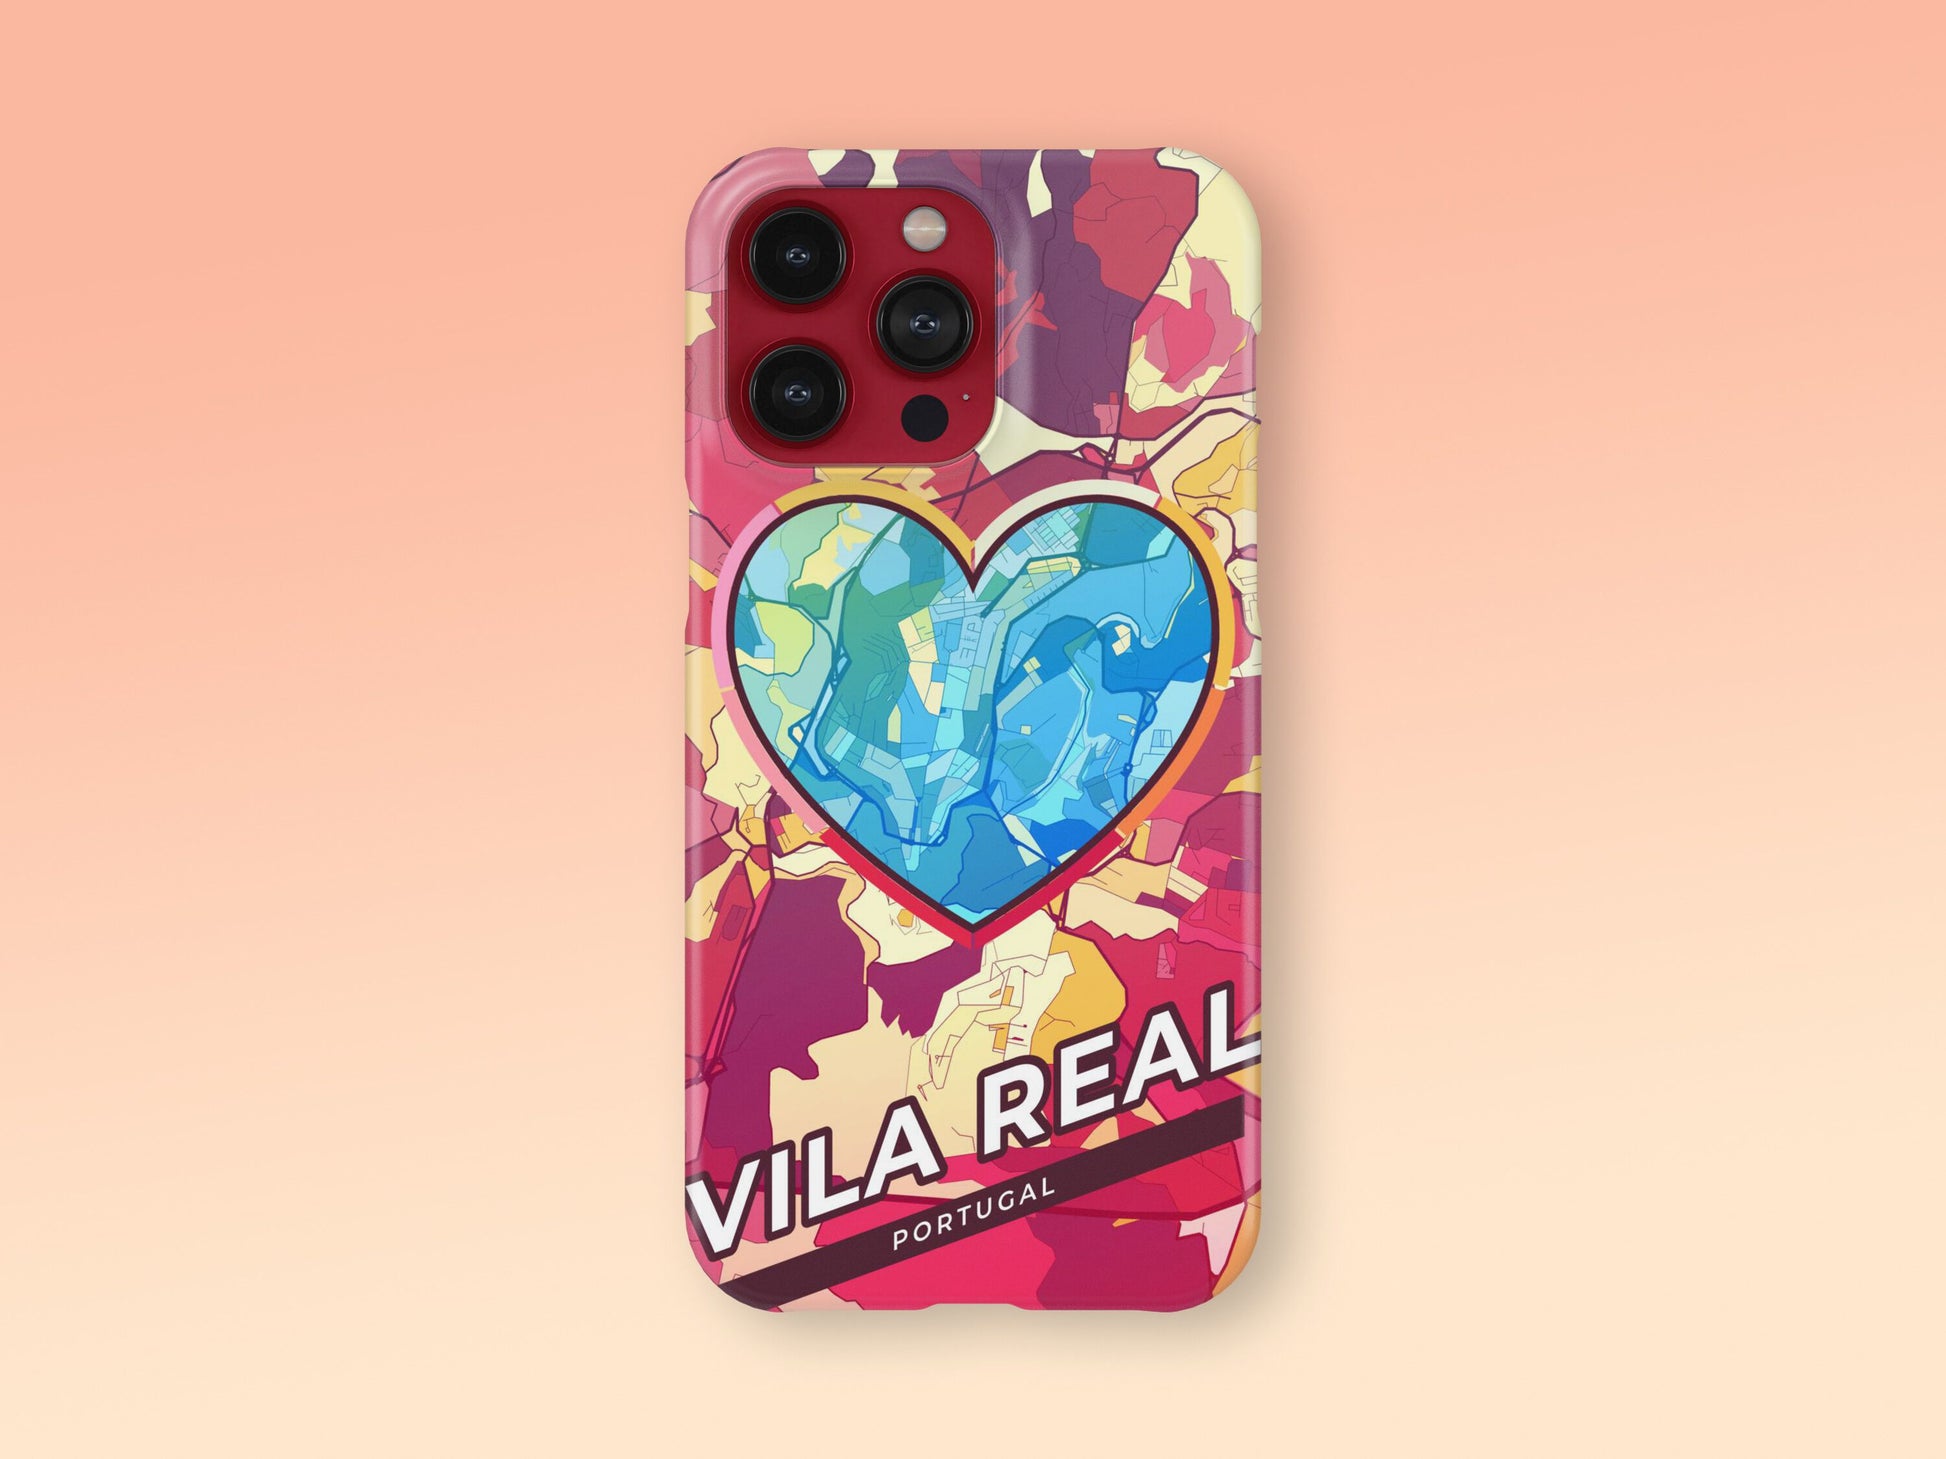 Vila Real Portugal slim phone case with colorful icon 2